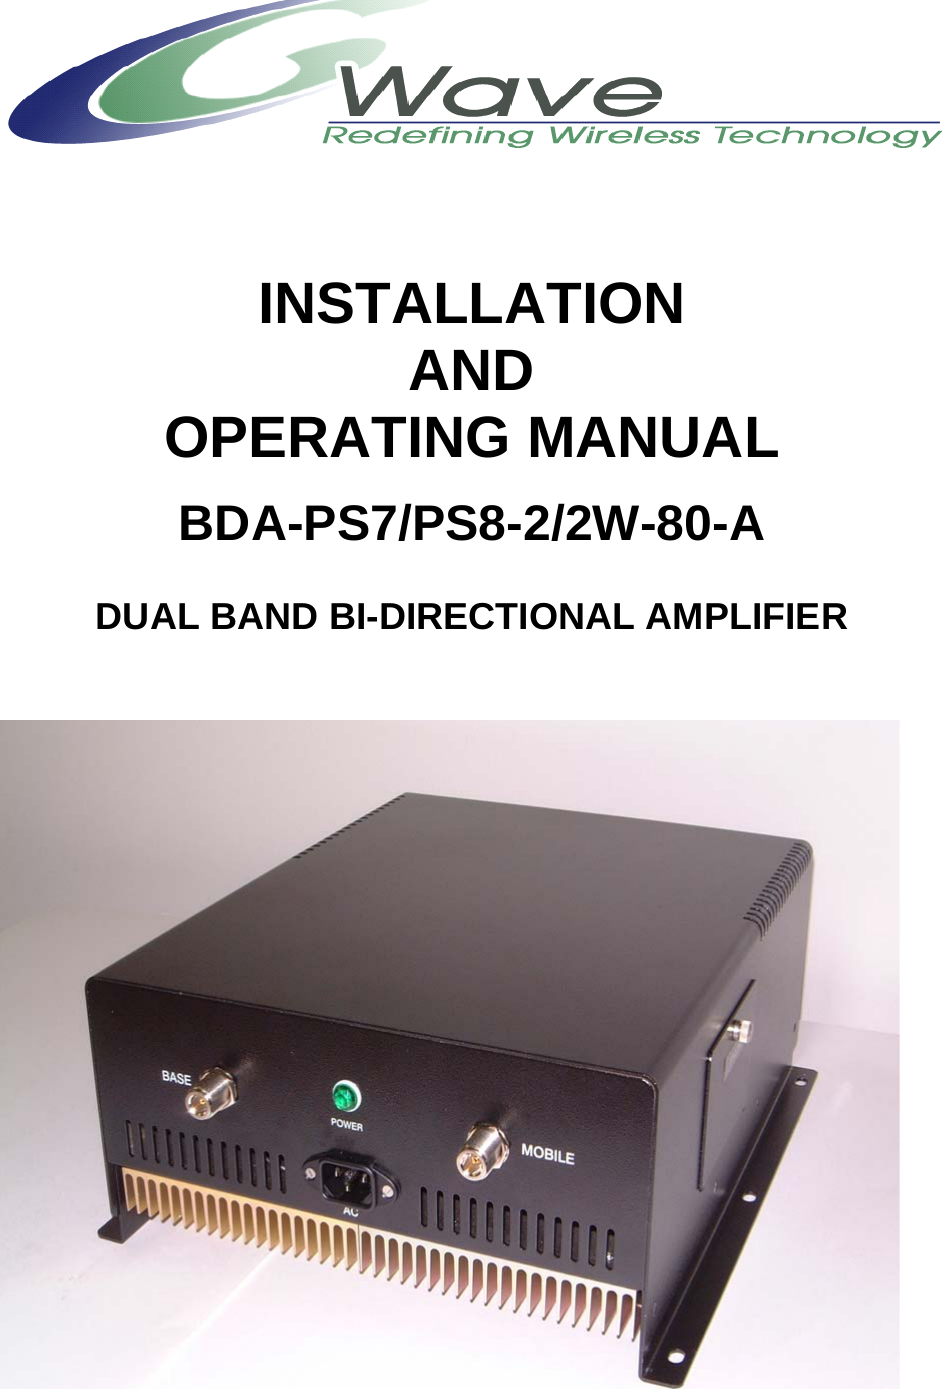      INSTALLATION AND OPERATING MANUAL  BDA-PS7/PS8-2/2W-80-A  DUAL BAND BI-DIRECTIONAL AMPLIFIER       